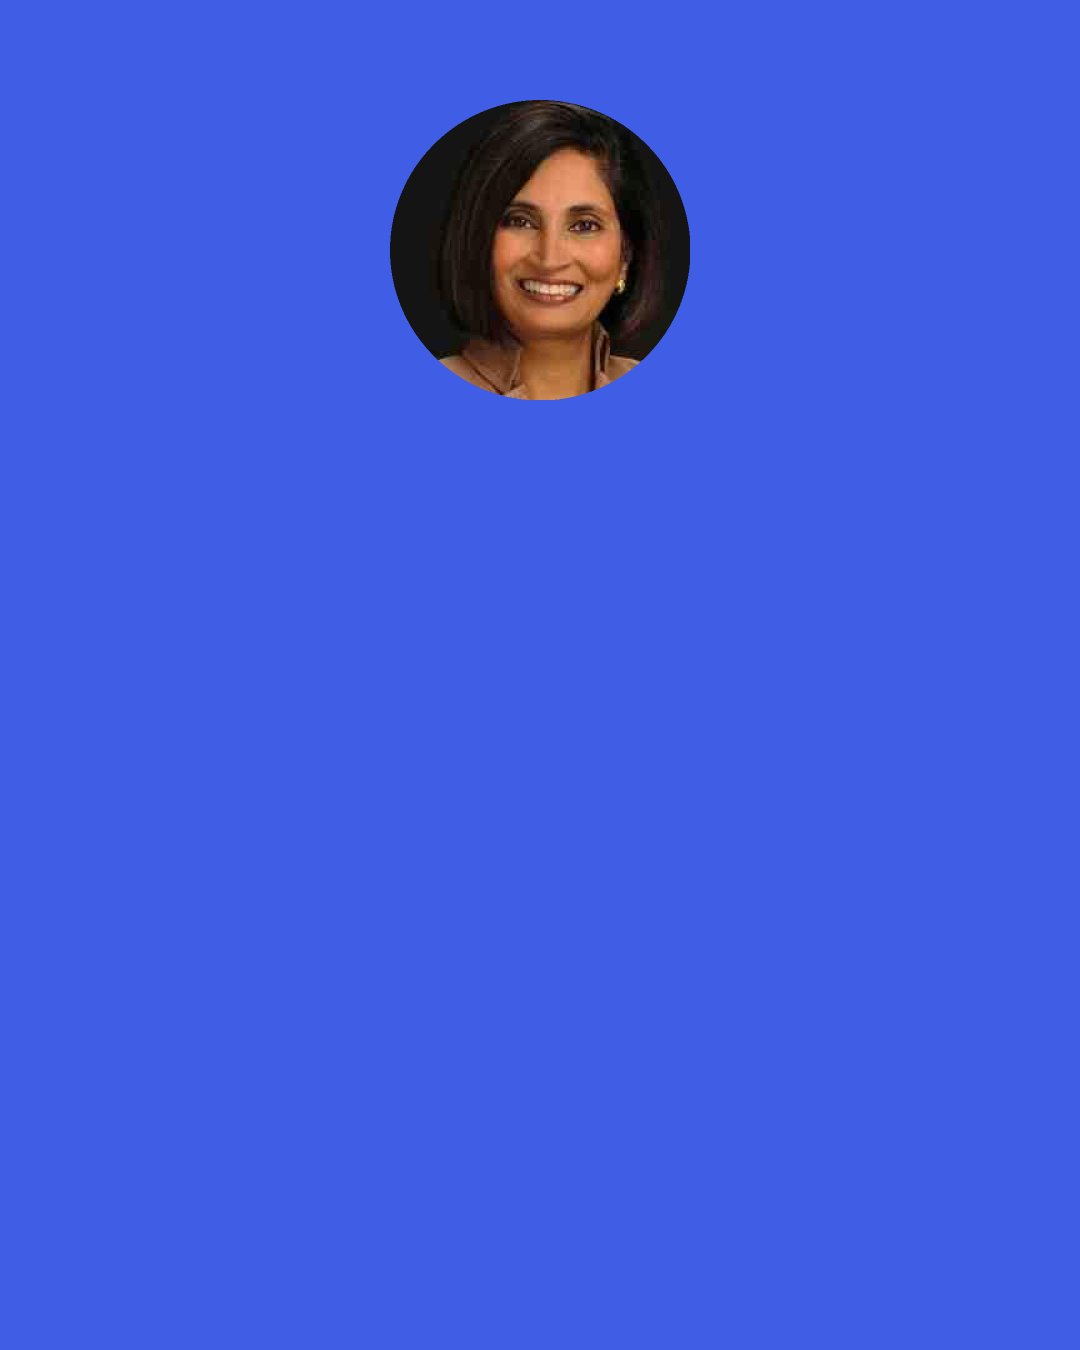 Padmasree Warrior: It makes me so much calmer when I’m responding to e-mails later.